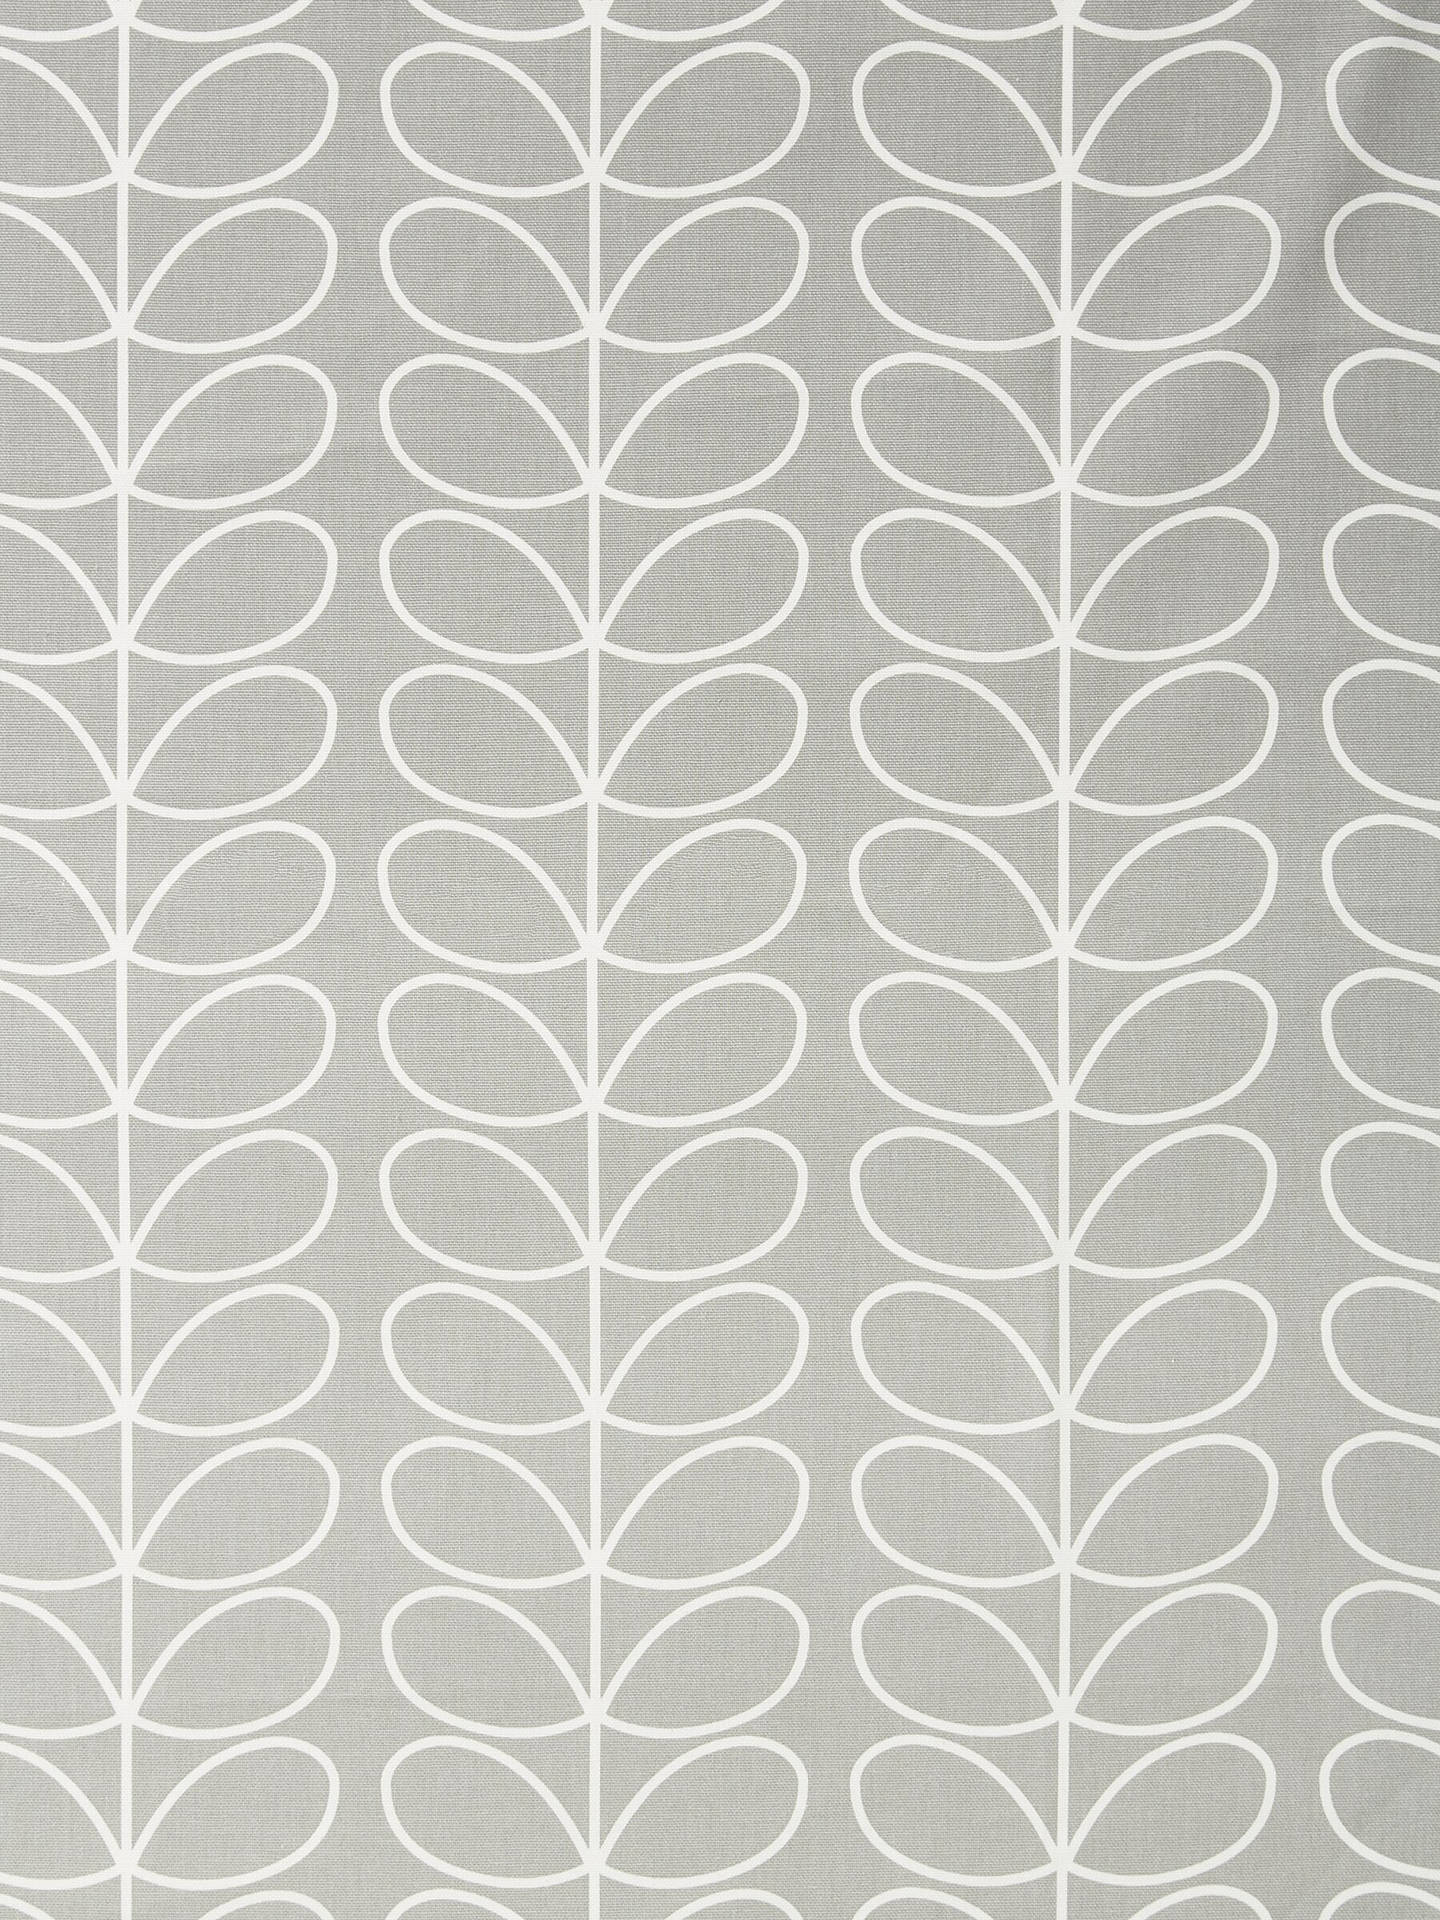 Orla Kiely Linear Stem Made to Measure Curtains, Silver